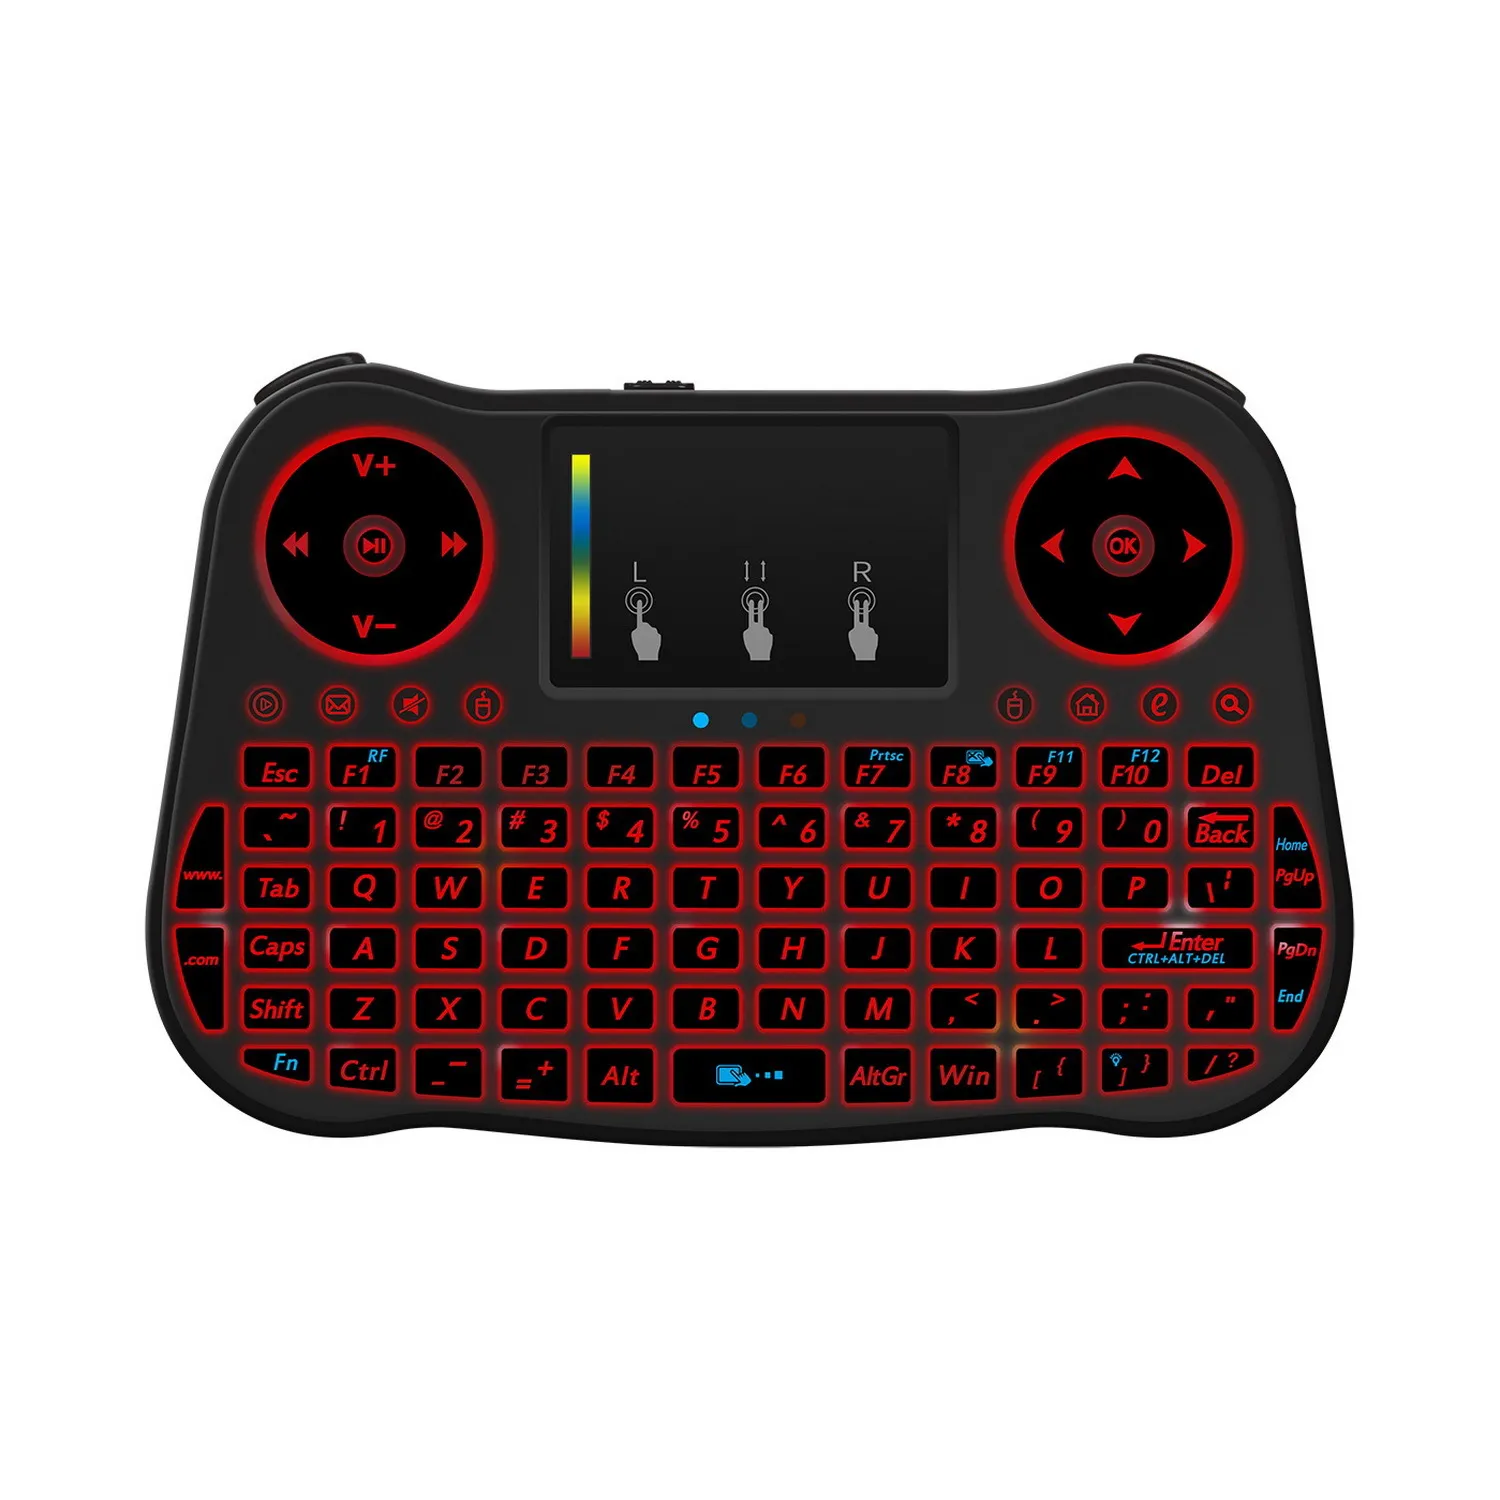 MINI MT08 2.4GHz Wireless Keyboard backlit English Remote Control Touchpad For Android TV Box Tablet PC Smart TV PK i8